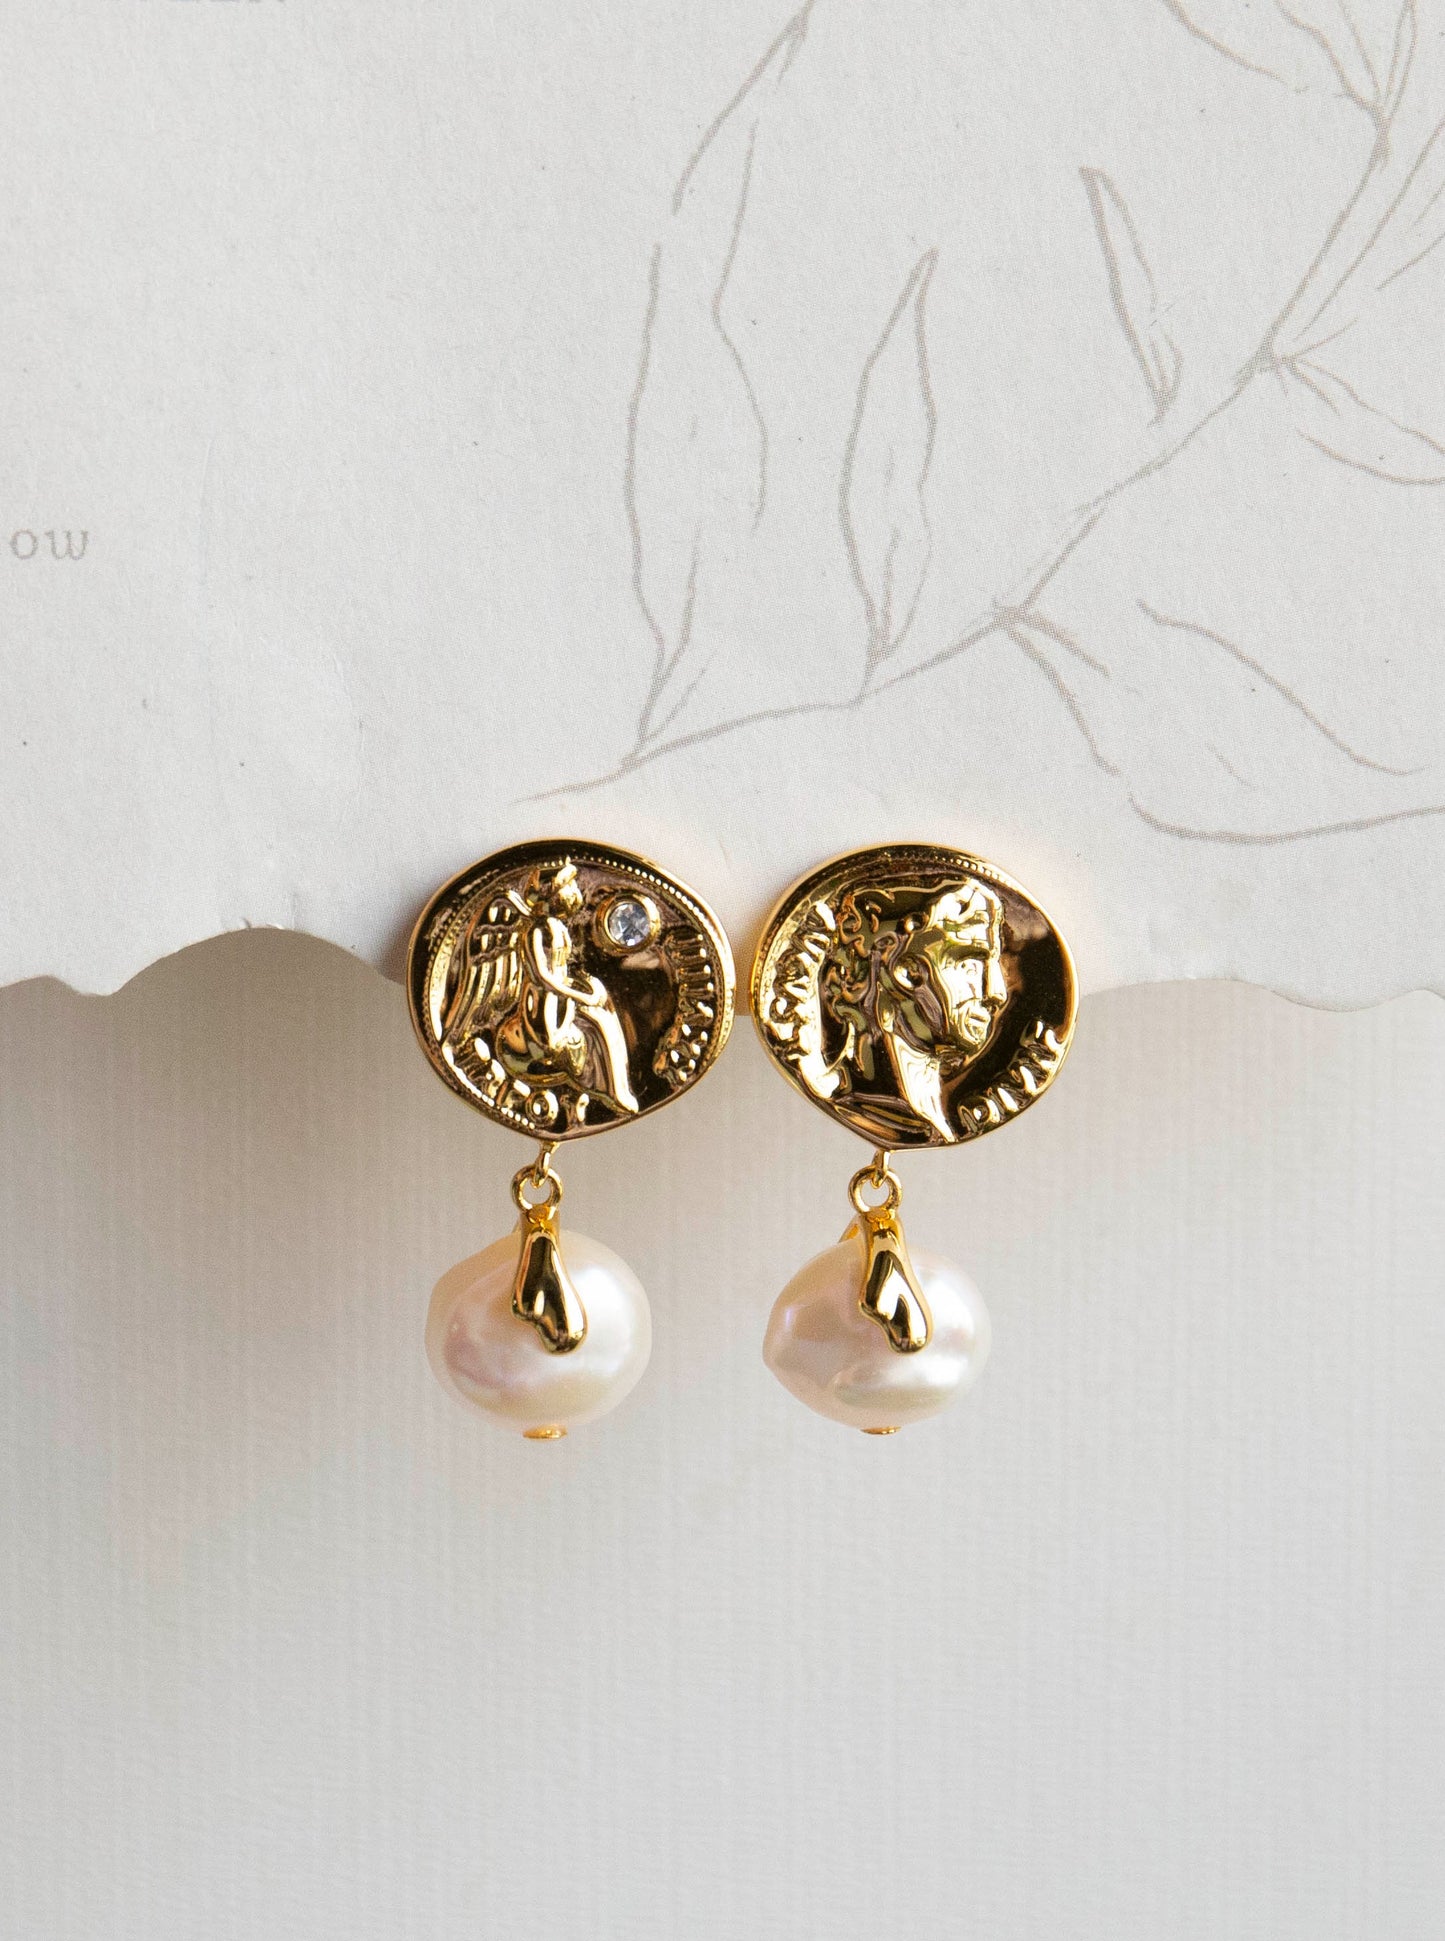 Ancient Coin and Pearl Stud Earrings